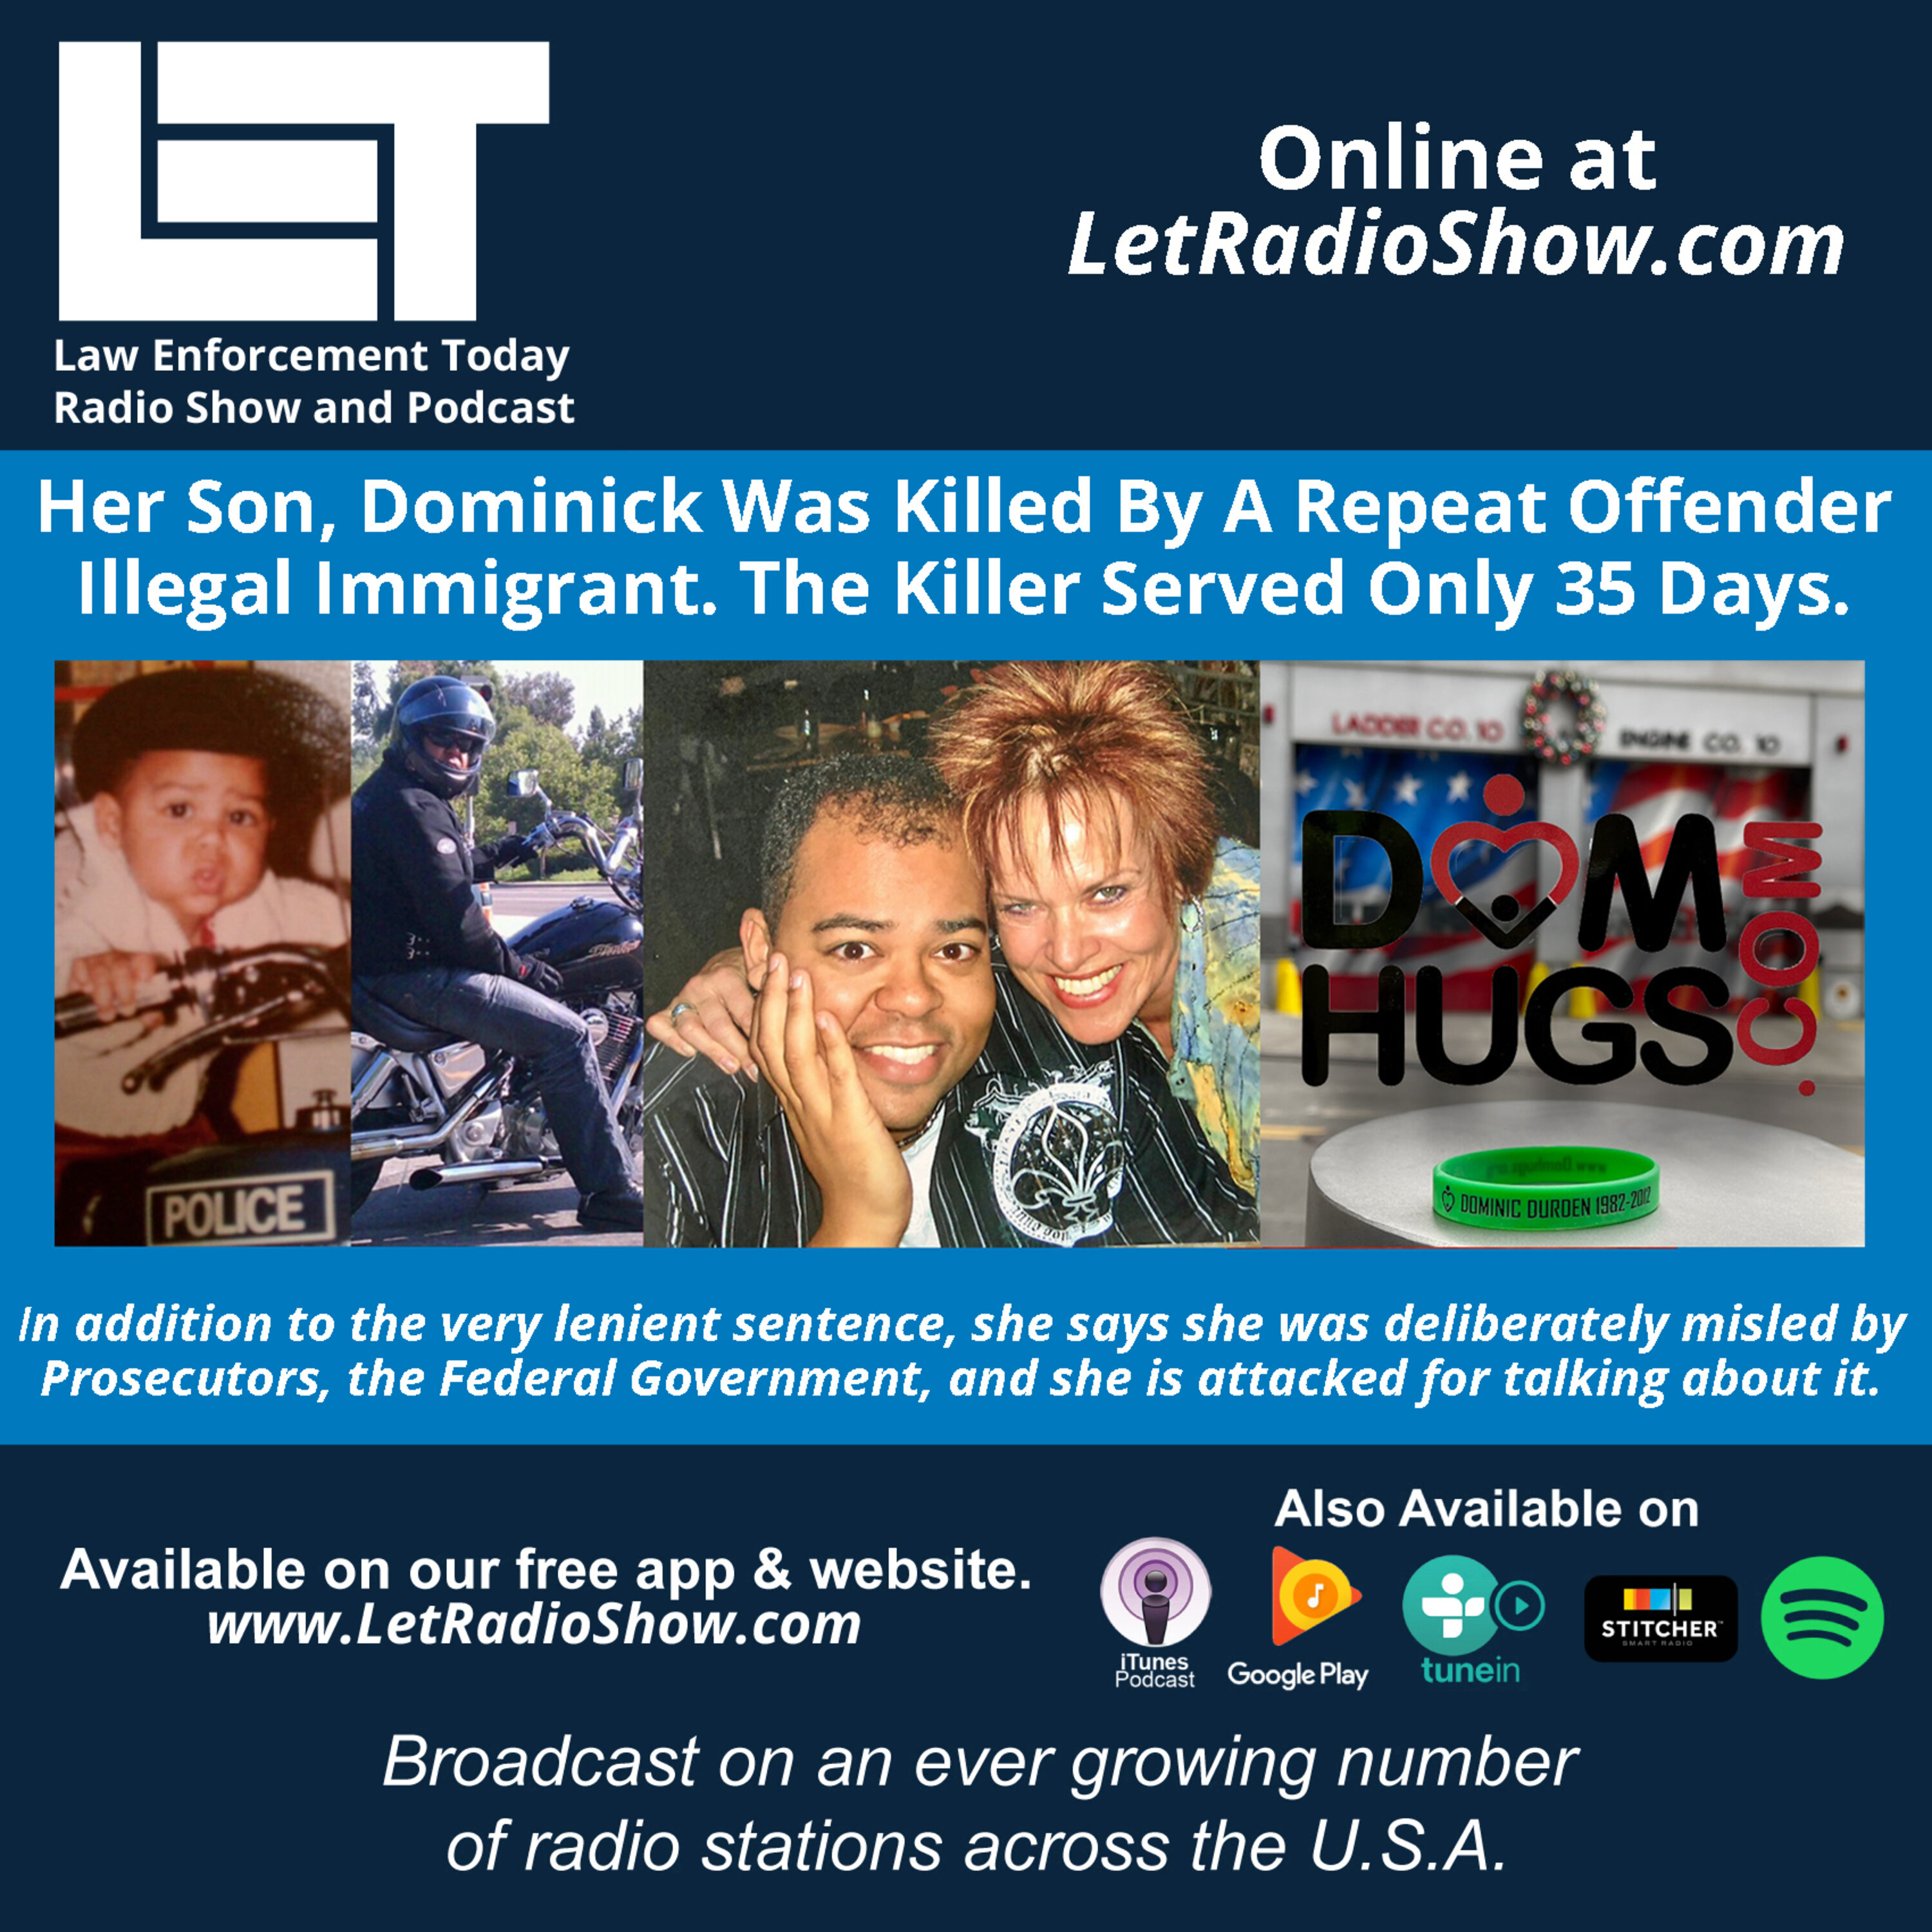 S6E6: Her Son Was Killed By A Repeat Offender Illegal Immigrant. The Killer Served Only 35 Days.